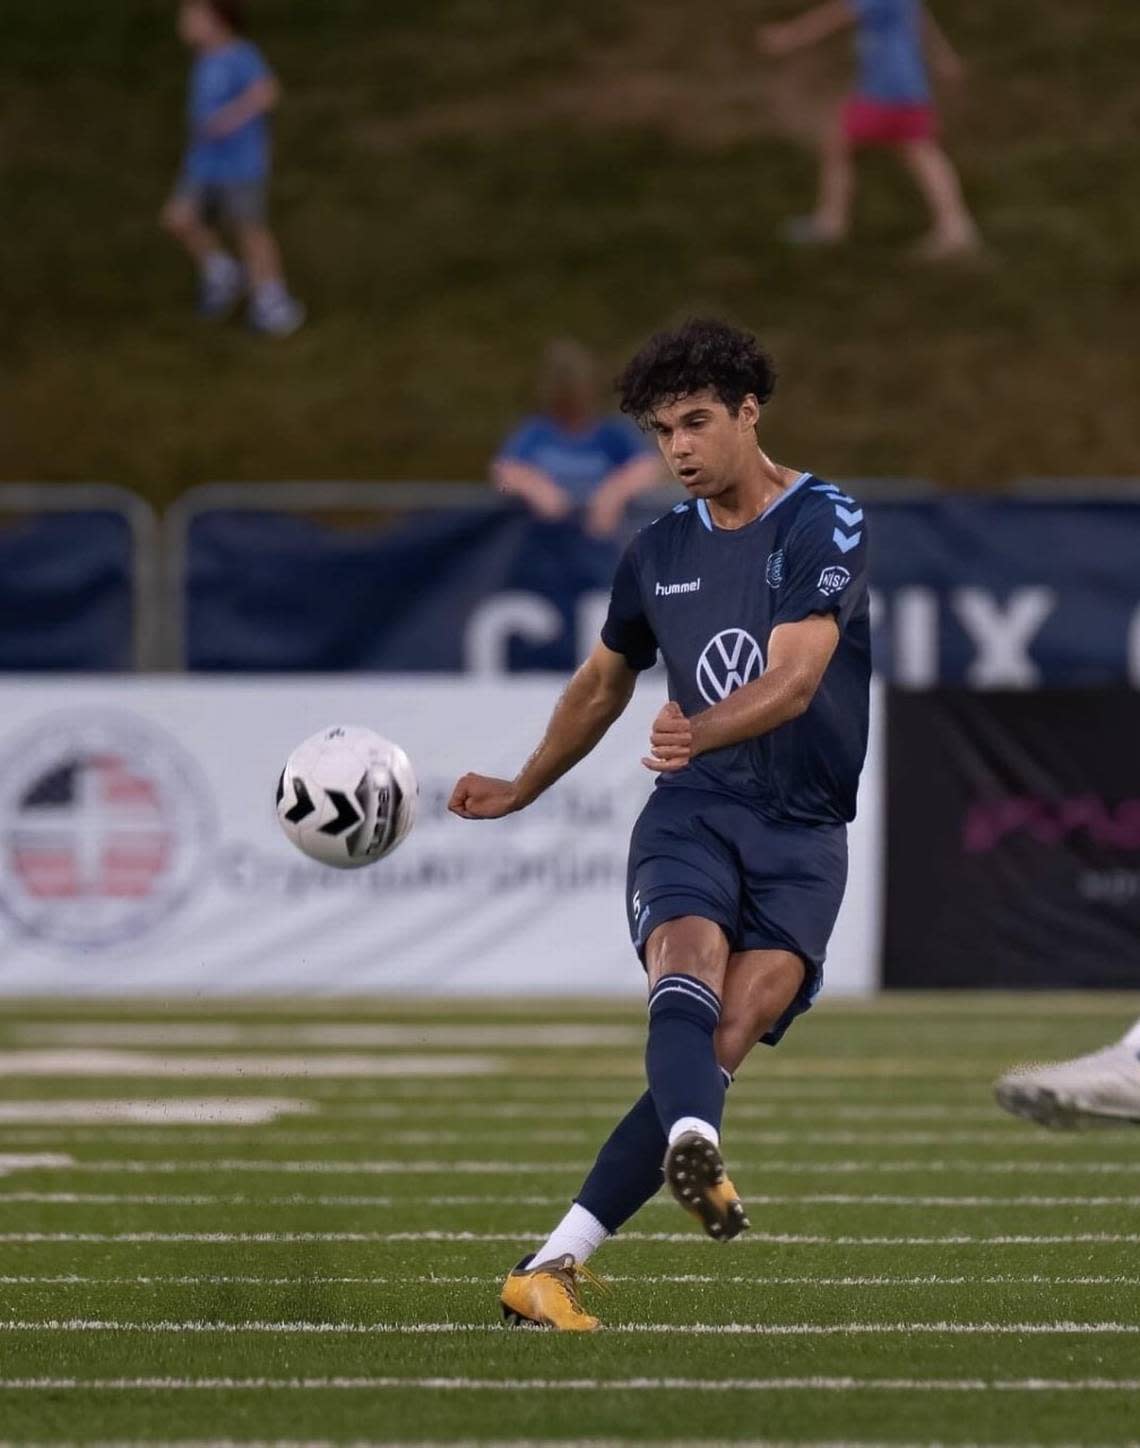 Defender Franky Martinez is one of the players recently signed to the first-ever USL League One roster for Lexington Sporting Club.